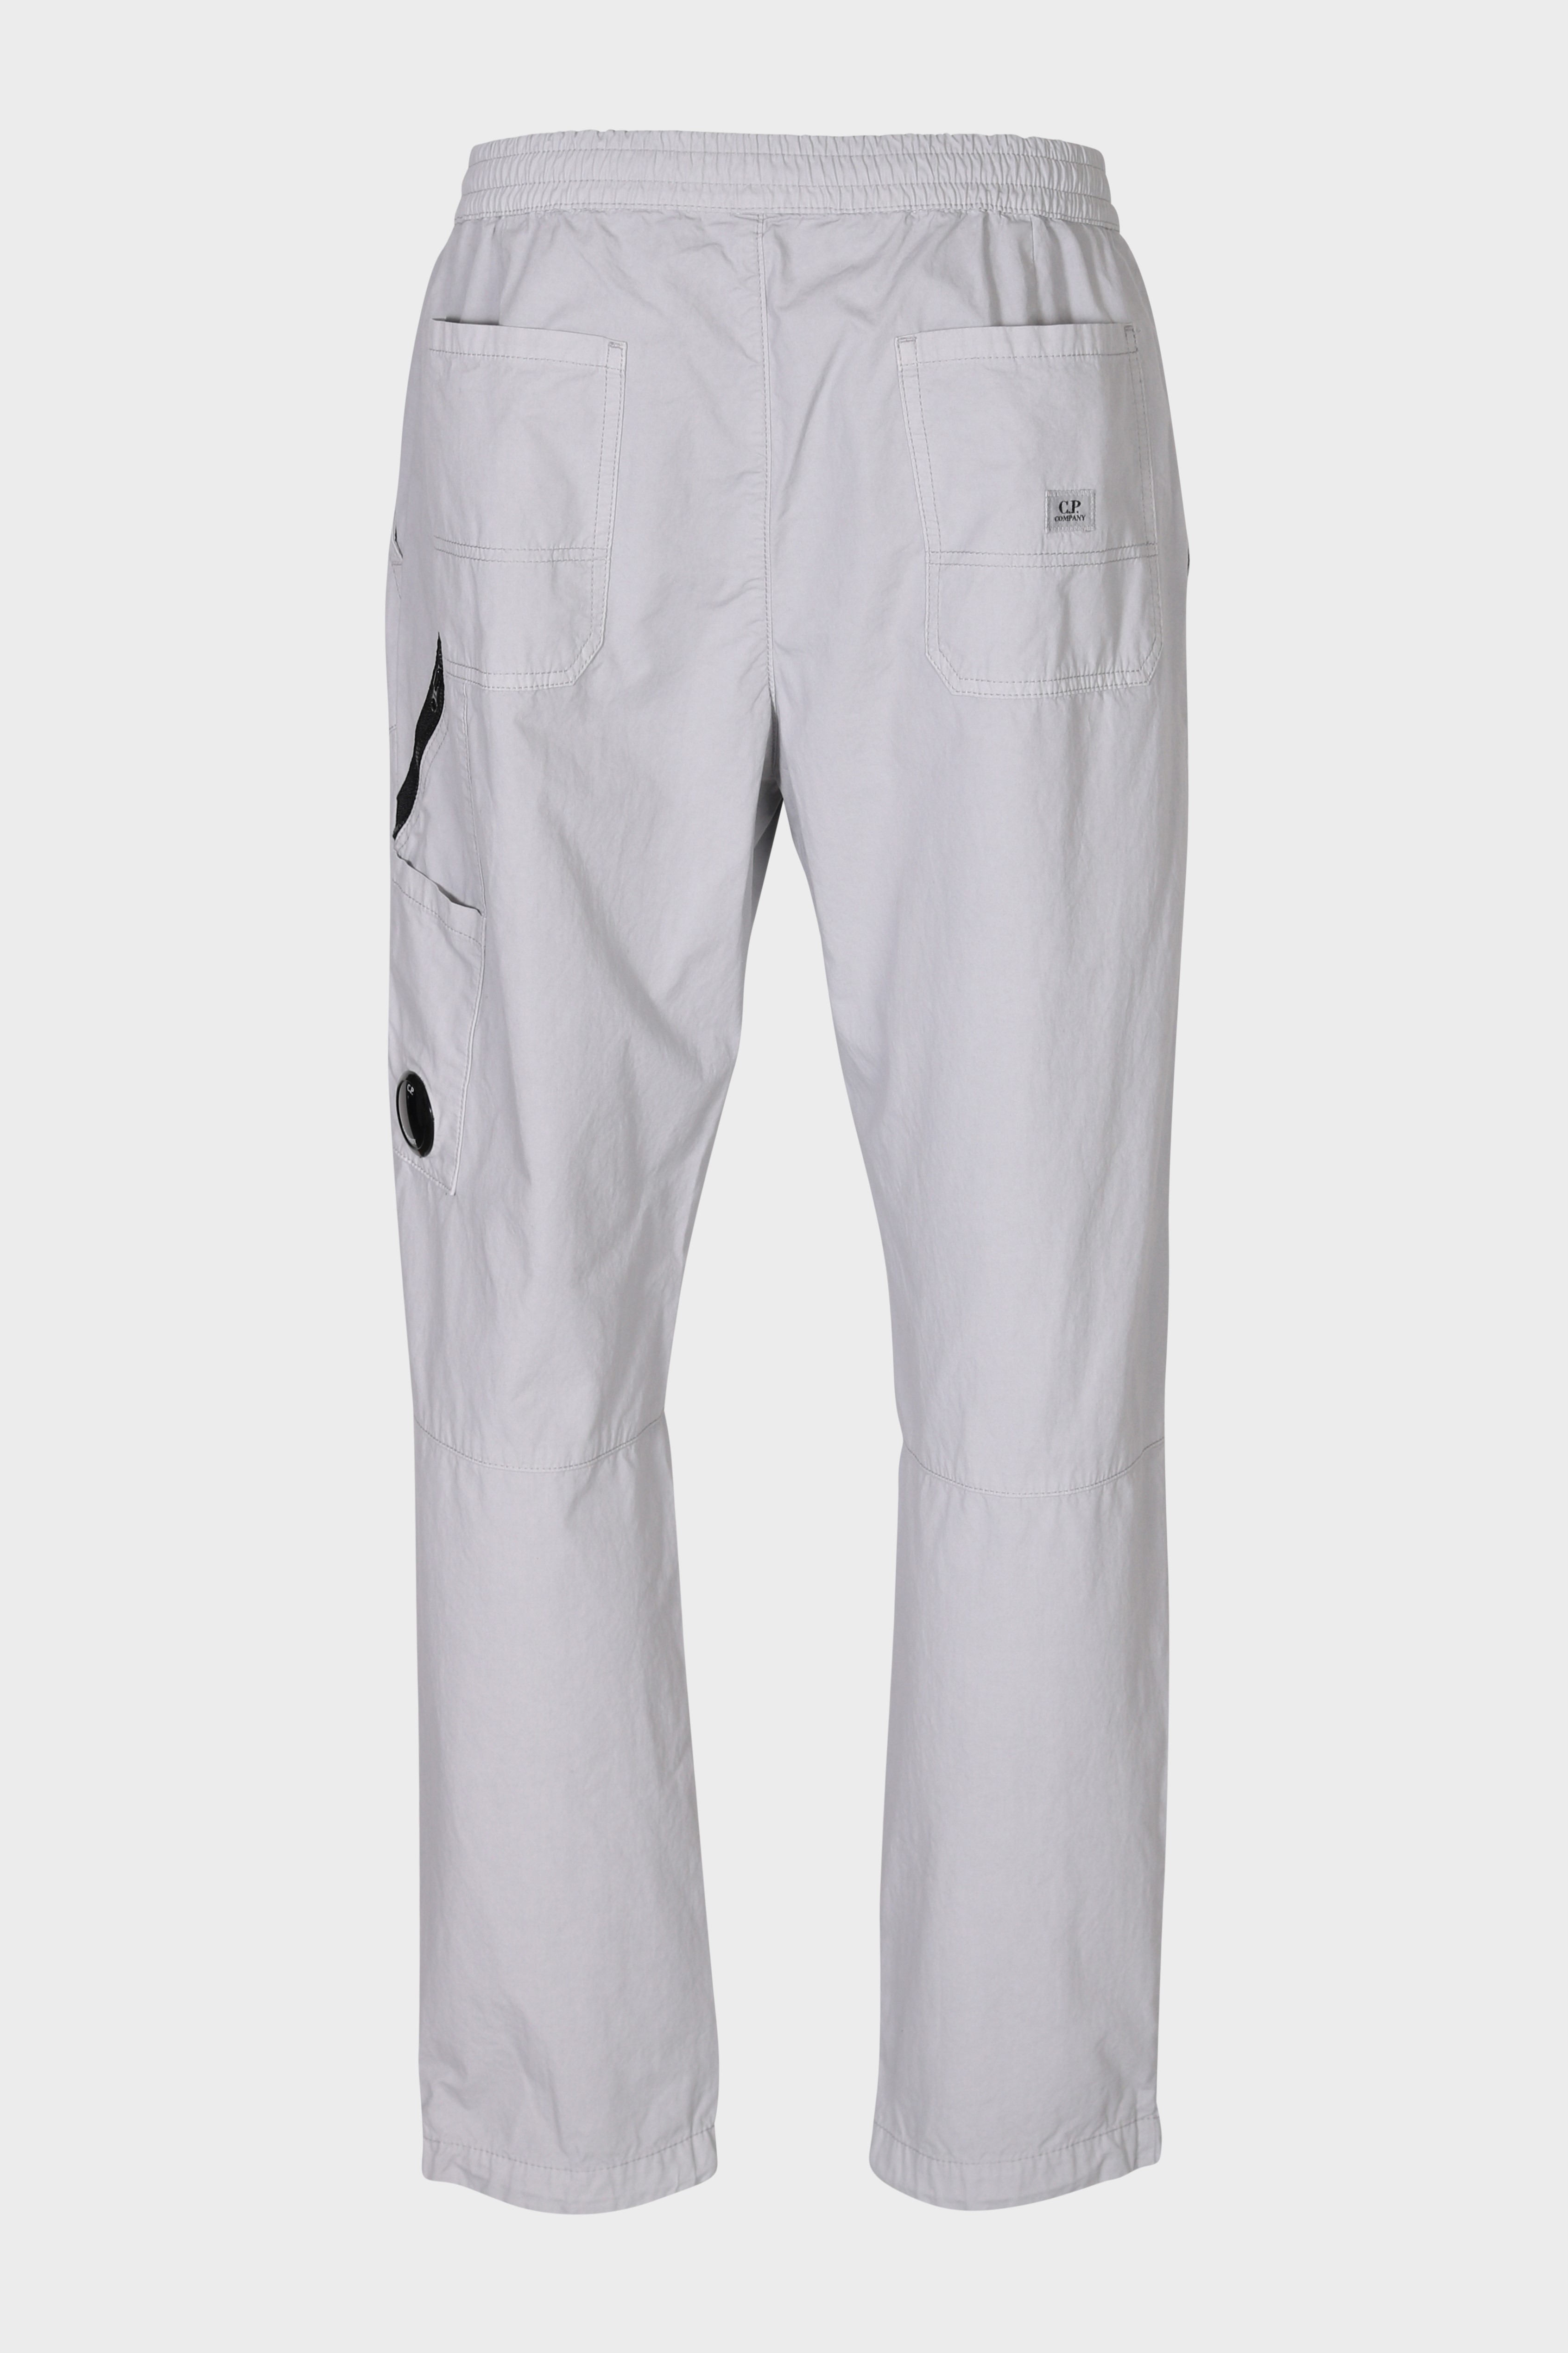 C.P. COMPANY Worker Pant in Drizzle Grey 54